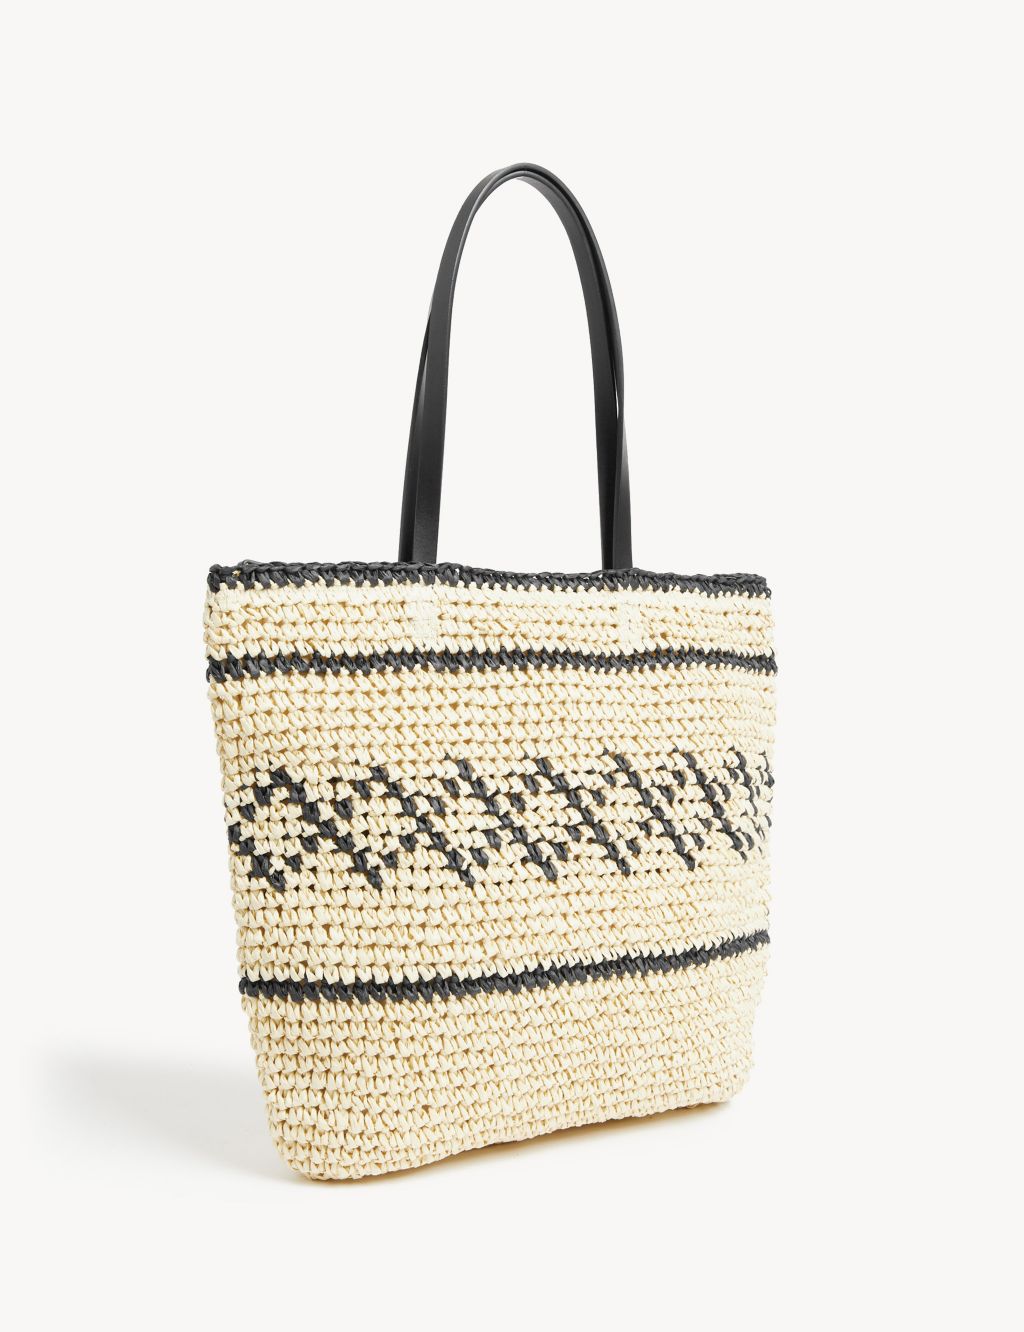 Straw Woven Tote Bag image 4